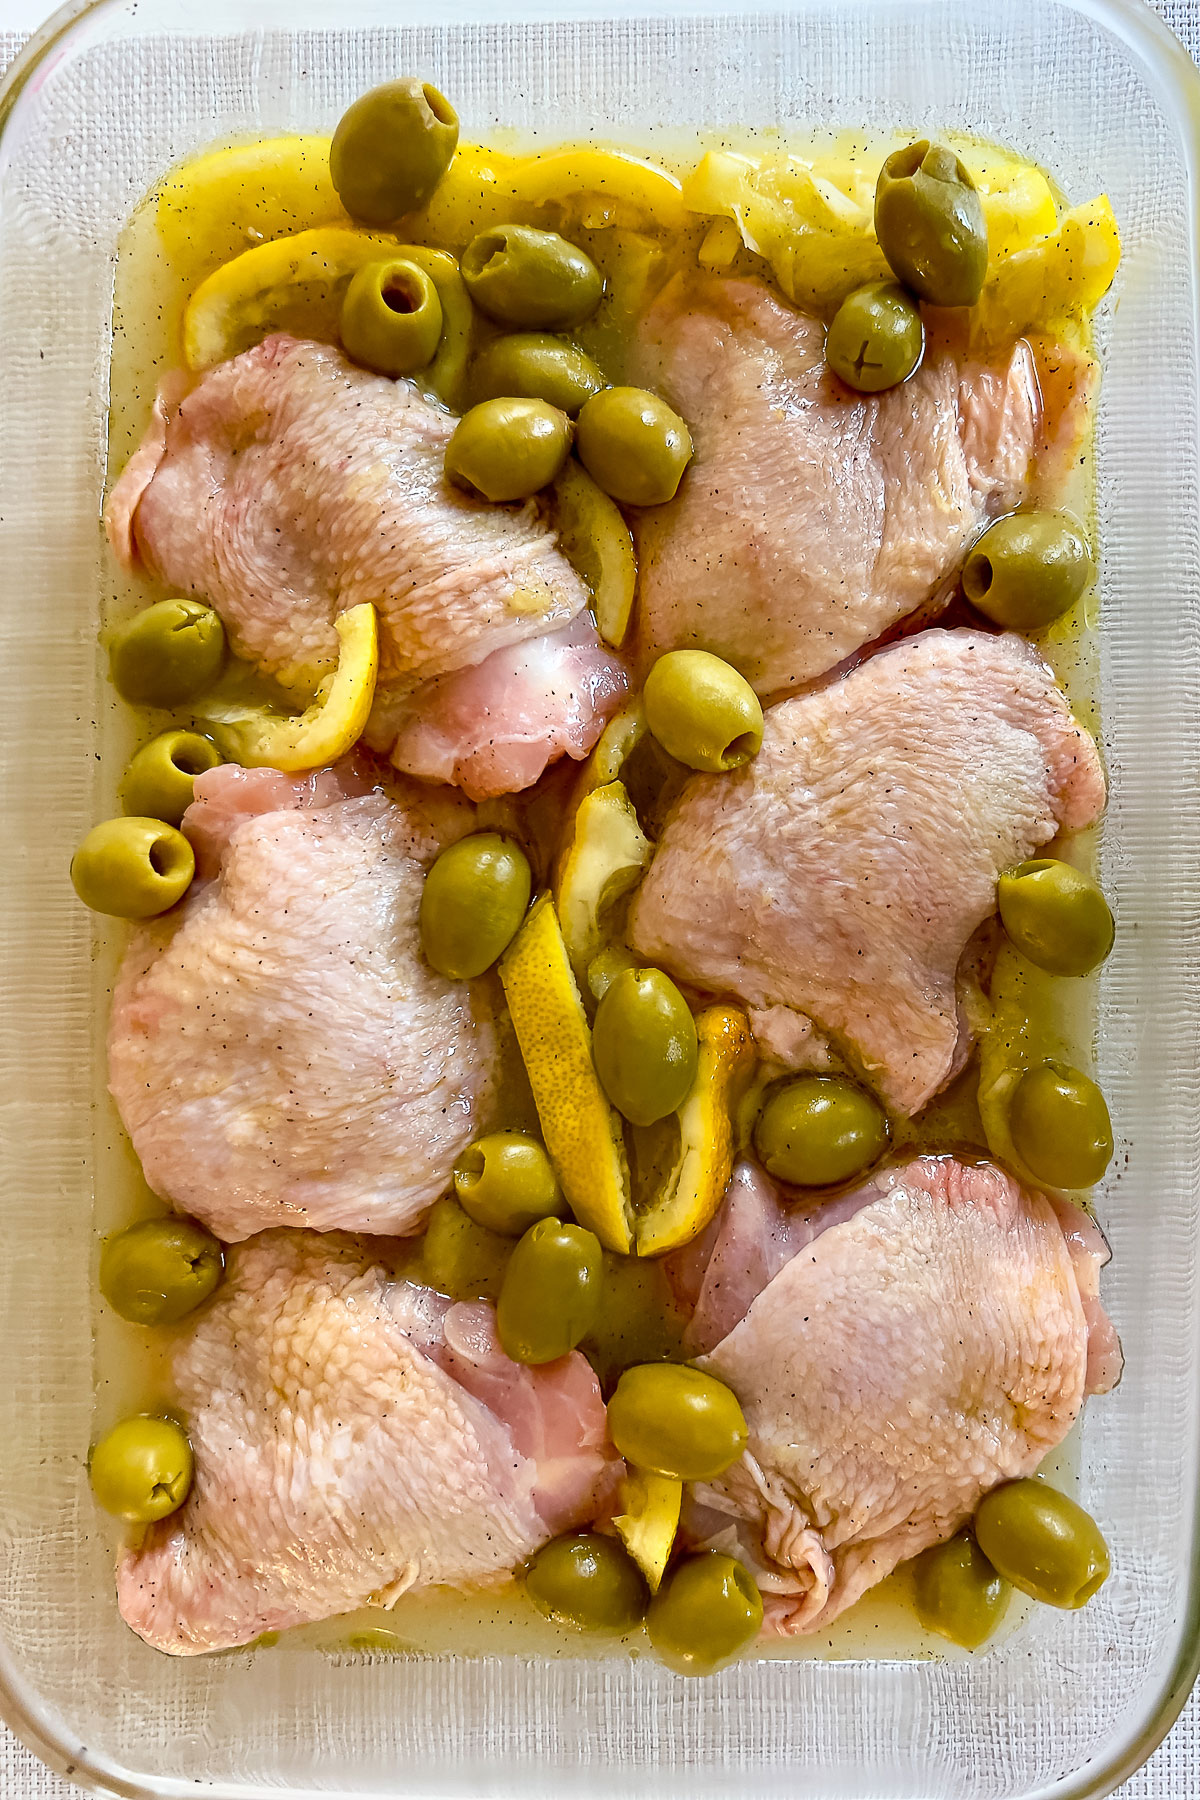 Chicken with lemons and olives unbaked0